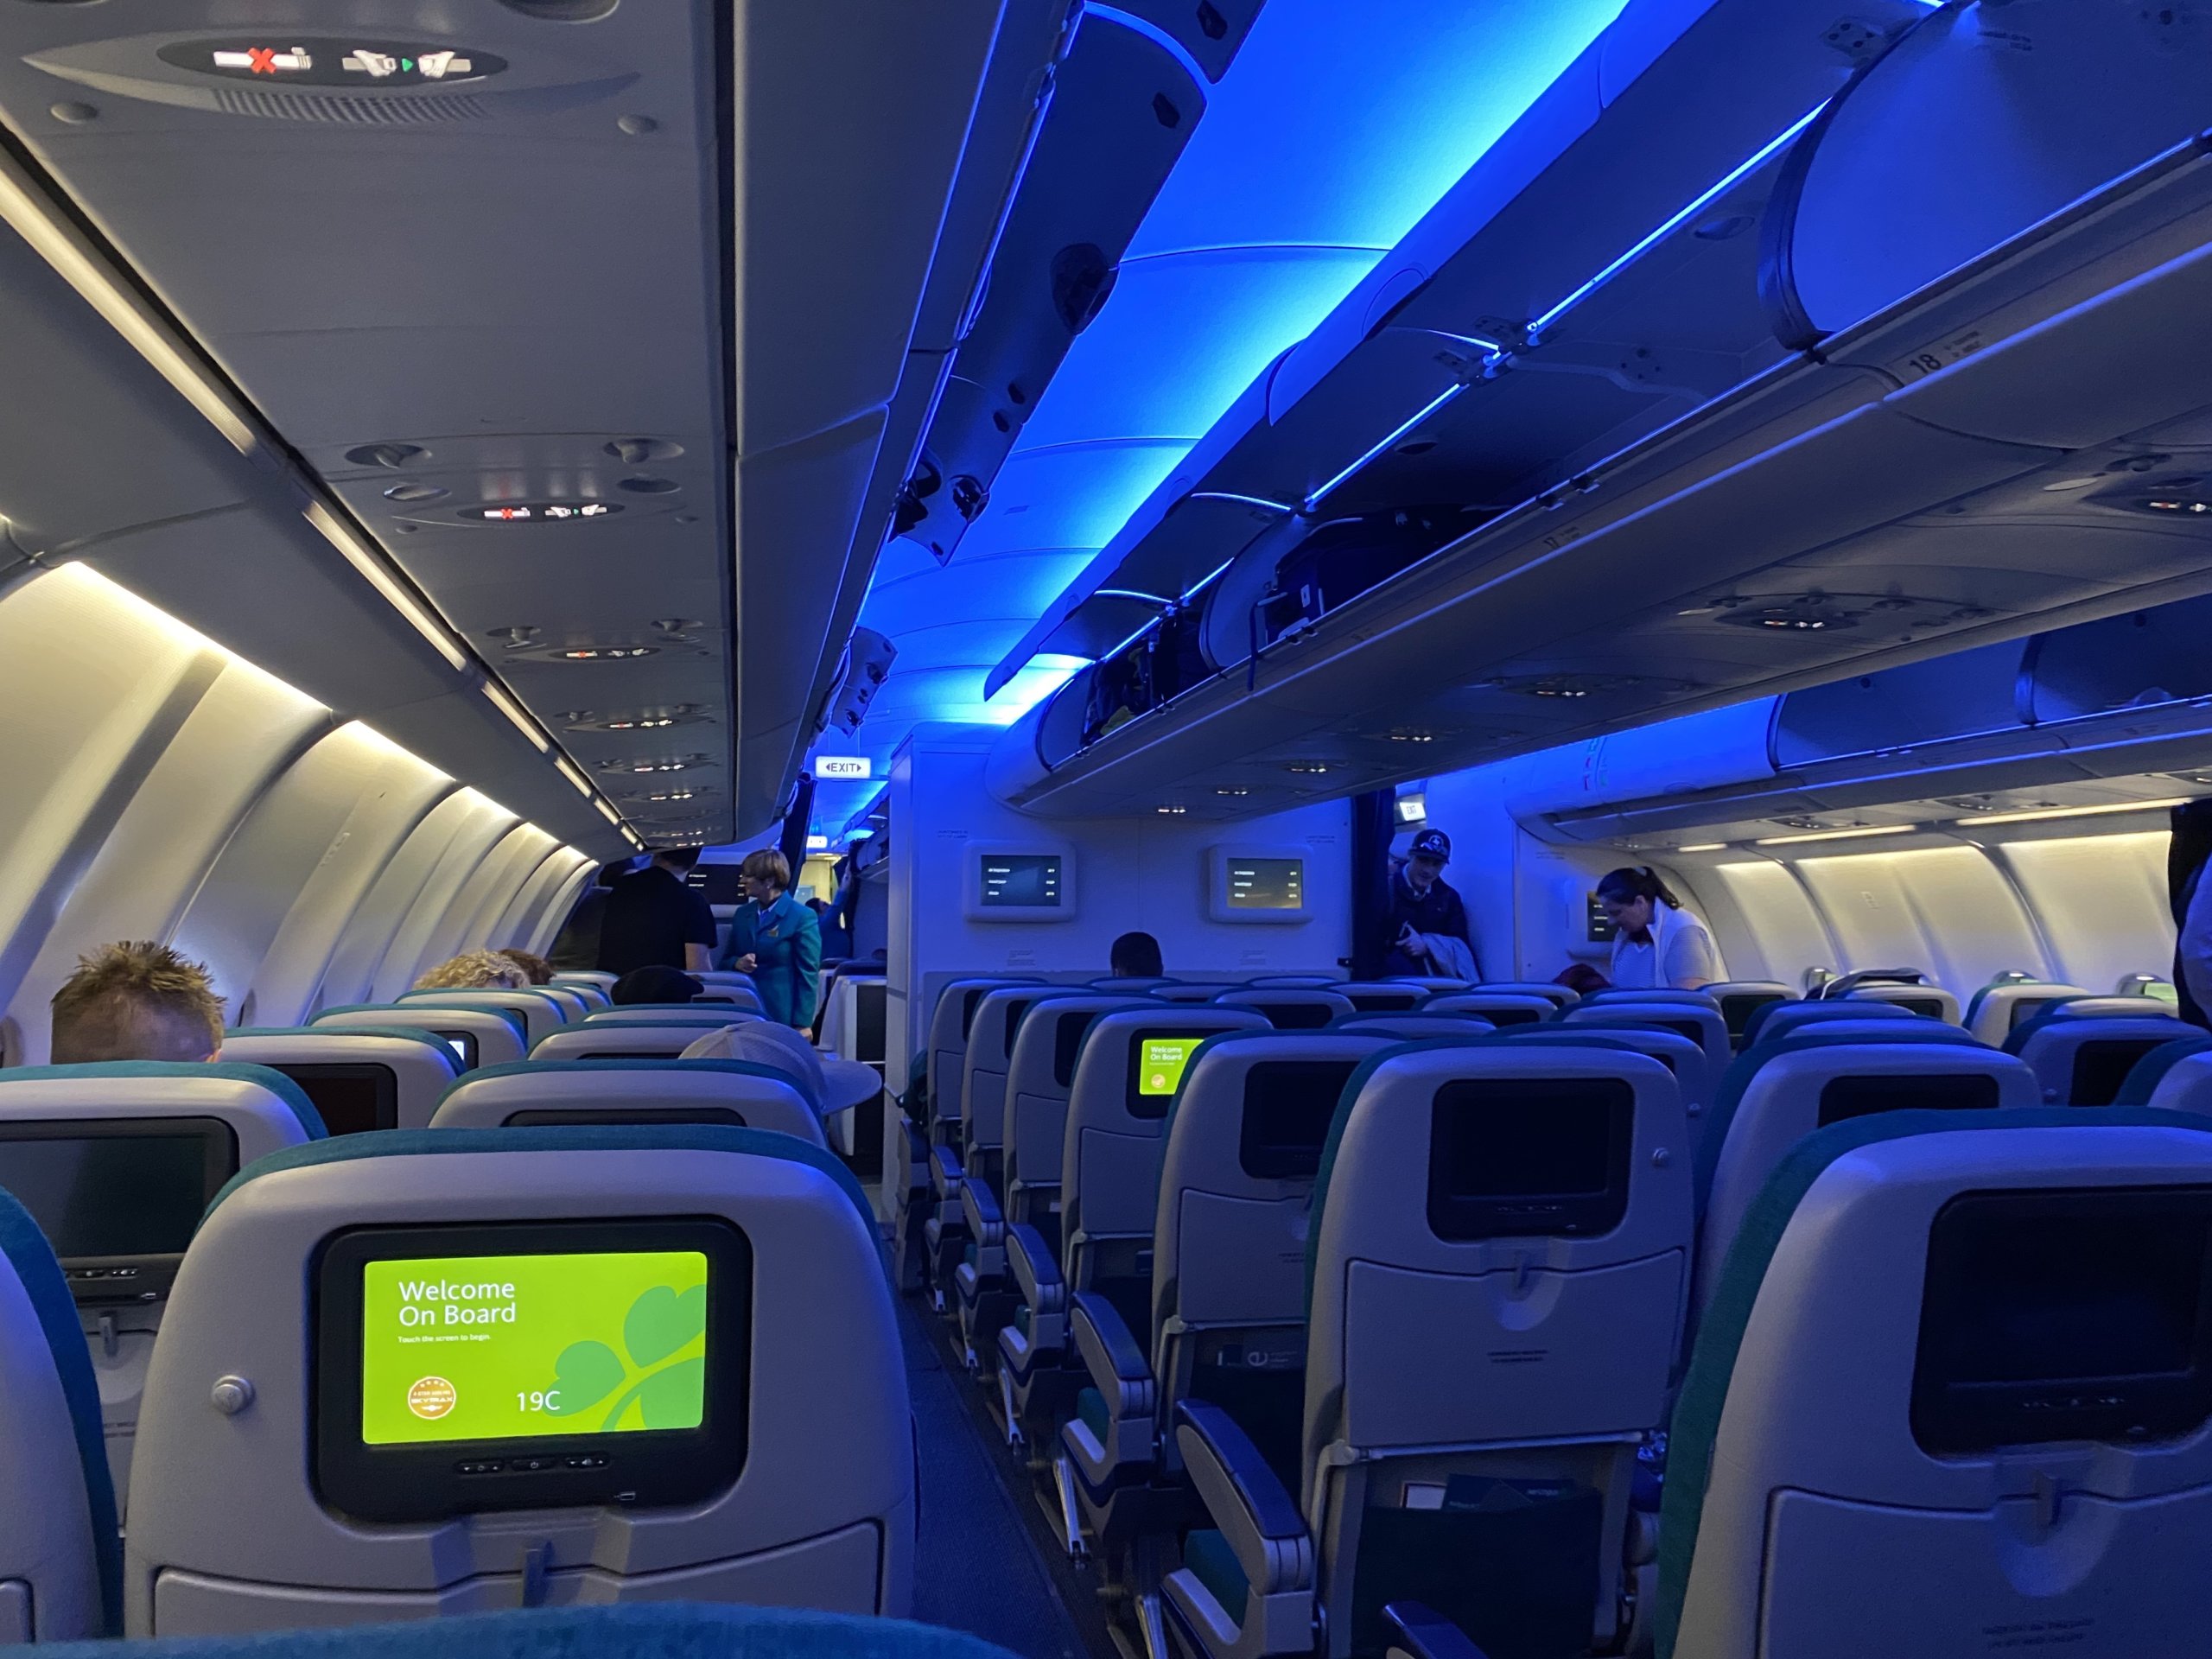 reviews on aer lingus airlines